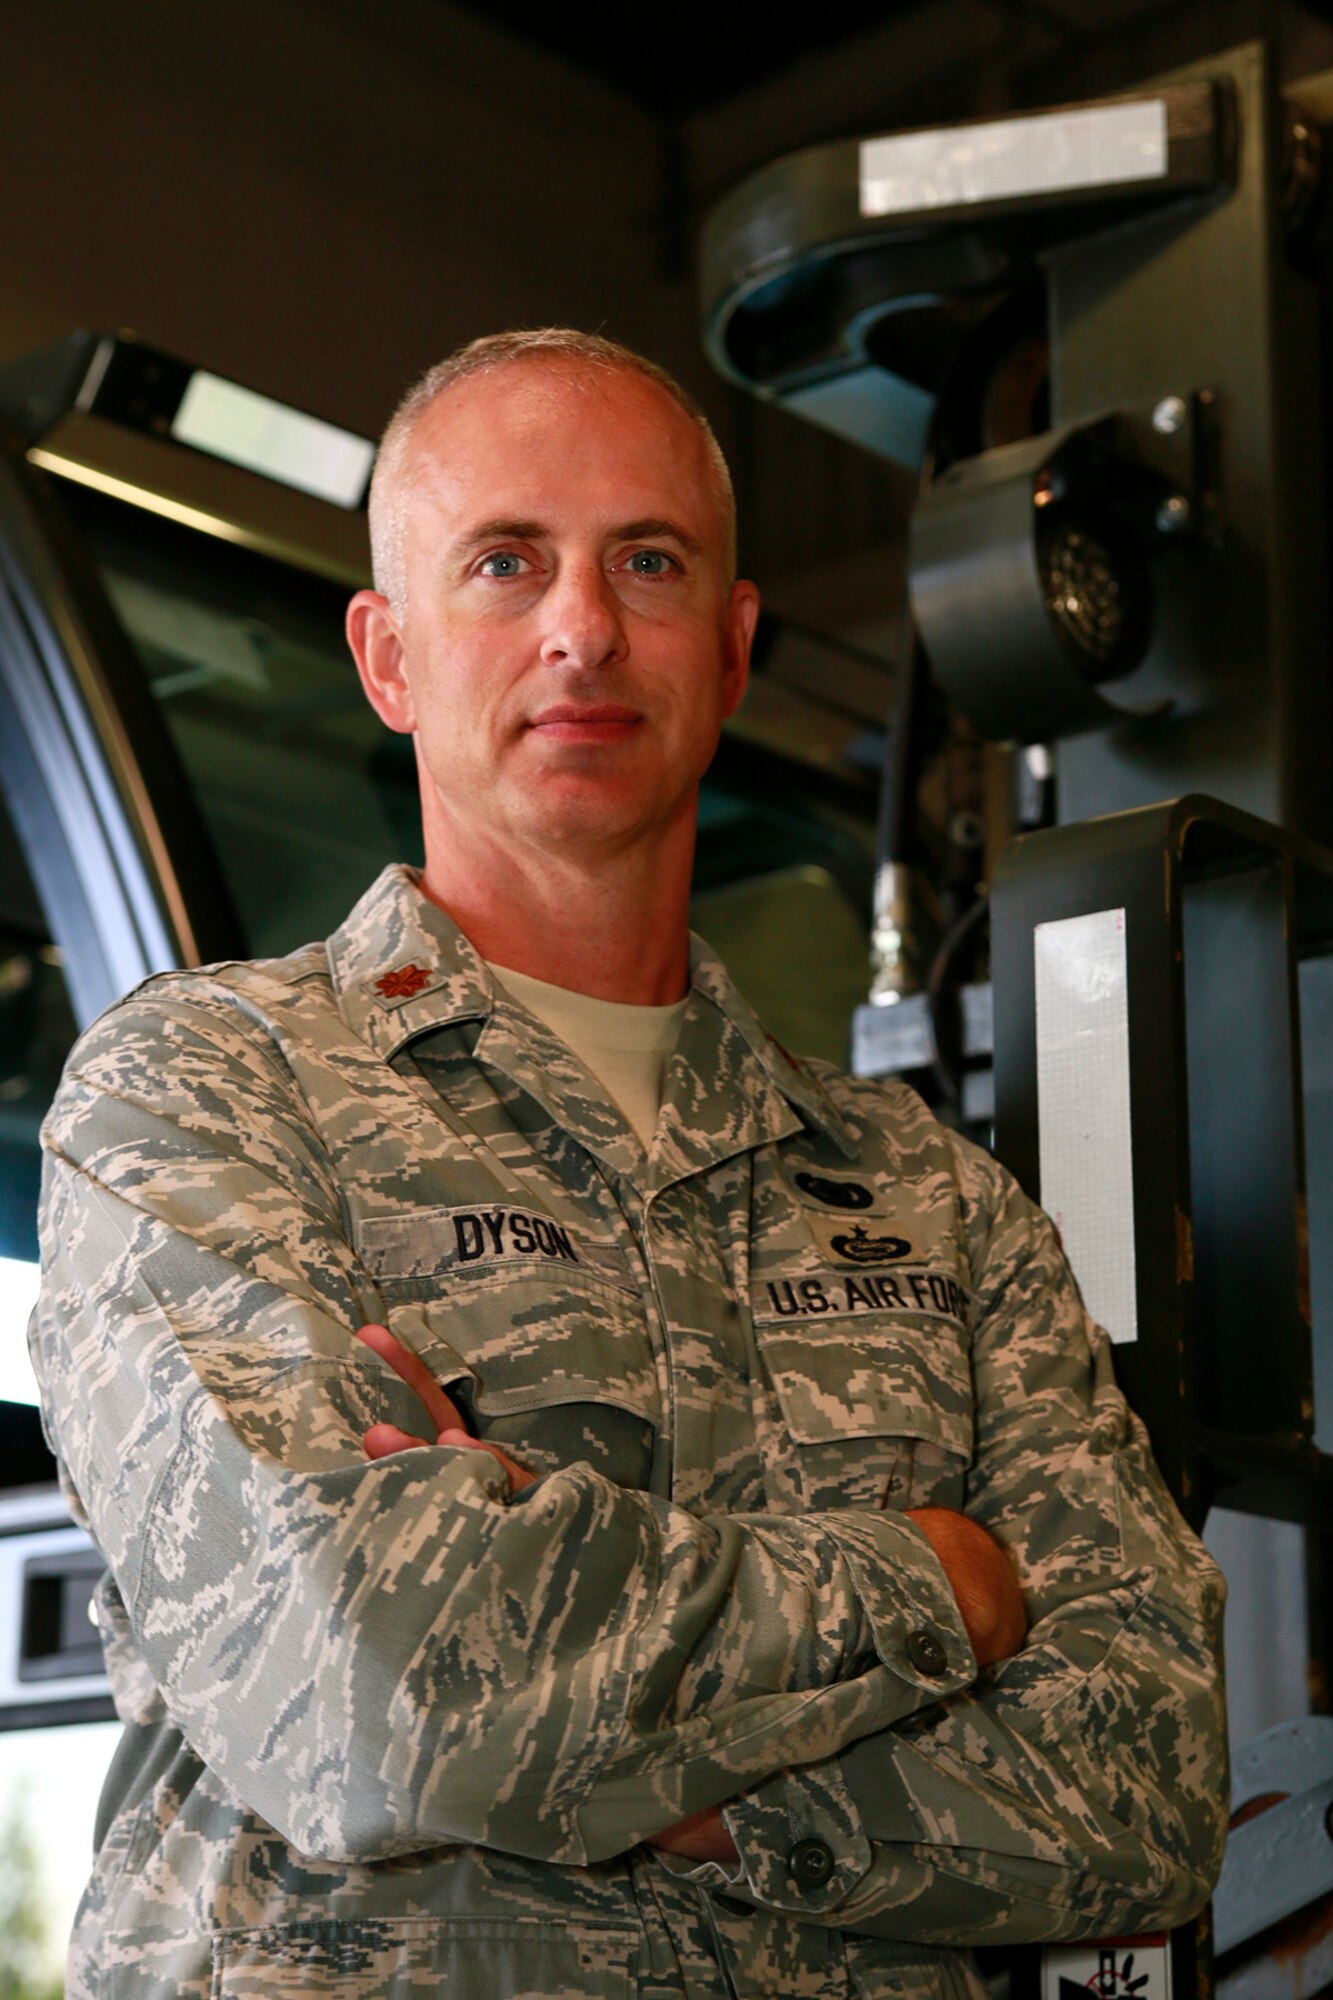 Maj. John Dyson, an operations officer with the 86th Aerial Port Squadron, McChord Field, Wash., deployed to the Transit Center at Manas, Kyrgyzstan, November 2012 to June 2013. During that timeframe, he provided oversight for the movement of more than 220,000 U.S. warfighters, 17,000 short tons of baggage, and just fewer than 3,000 short tons of cargo on 2,700-plus missions. In addition to his normal port duties, he was one of the logistics officers who support the recovery efforts of the KC-135 Stratotanker mishap in May. (U.S. Air Force Reserve photo by Master Sgt. Jake Chappelle)